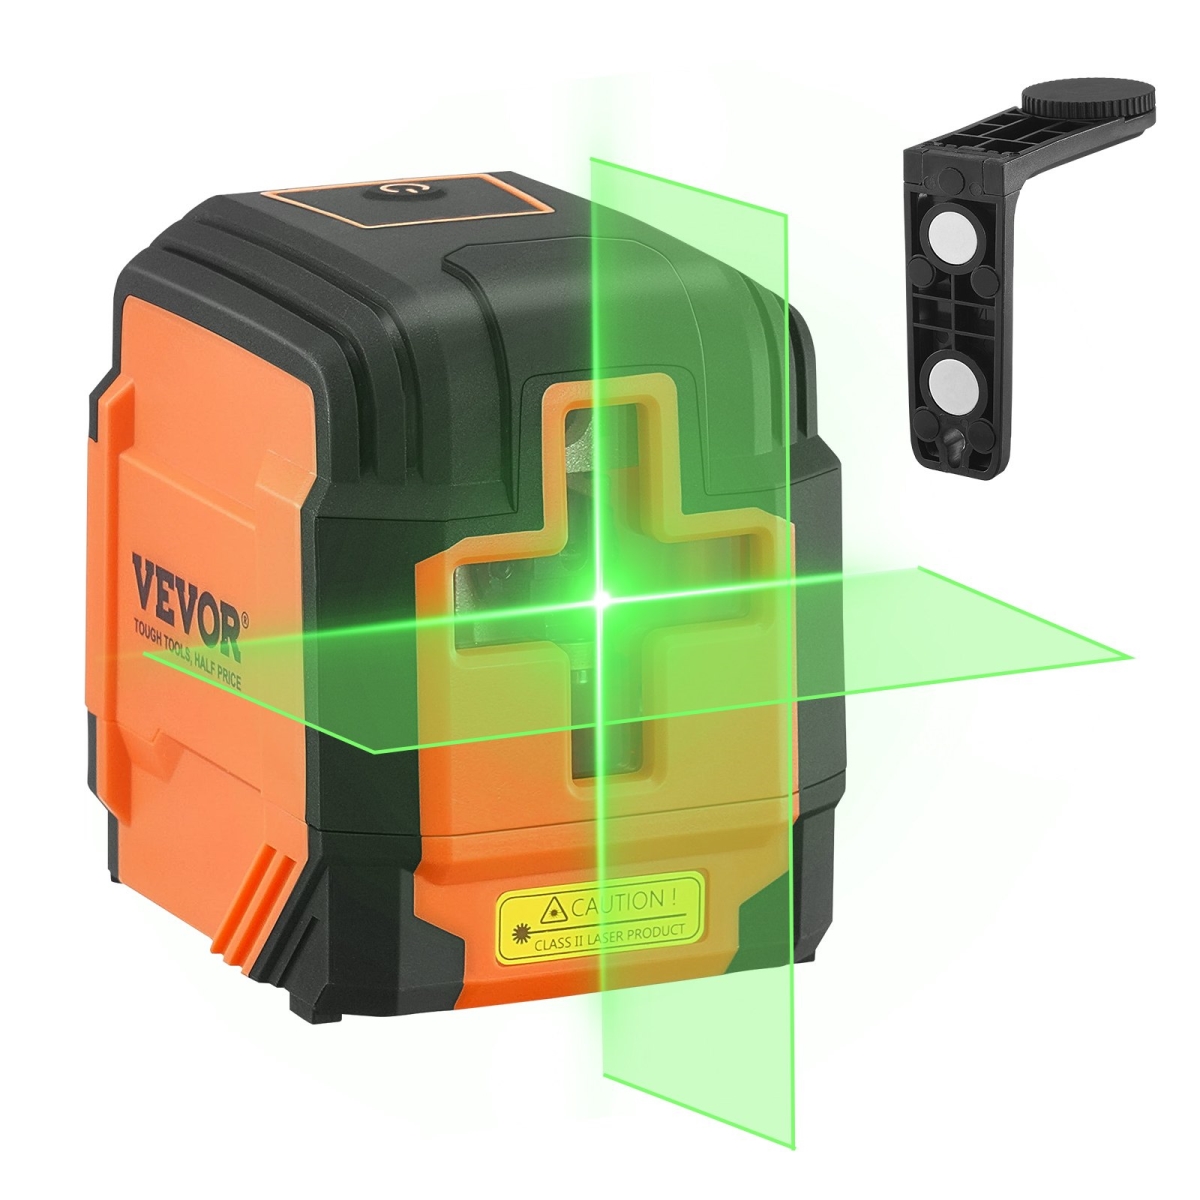 Picture of Vevor XJGSPYHH50FT2QGVSV9 50 ft. Laser Level Green Cross Line Self Leveling High Accuracy Measure Tool